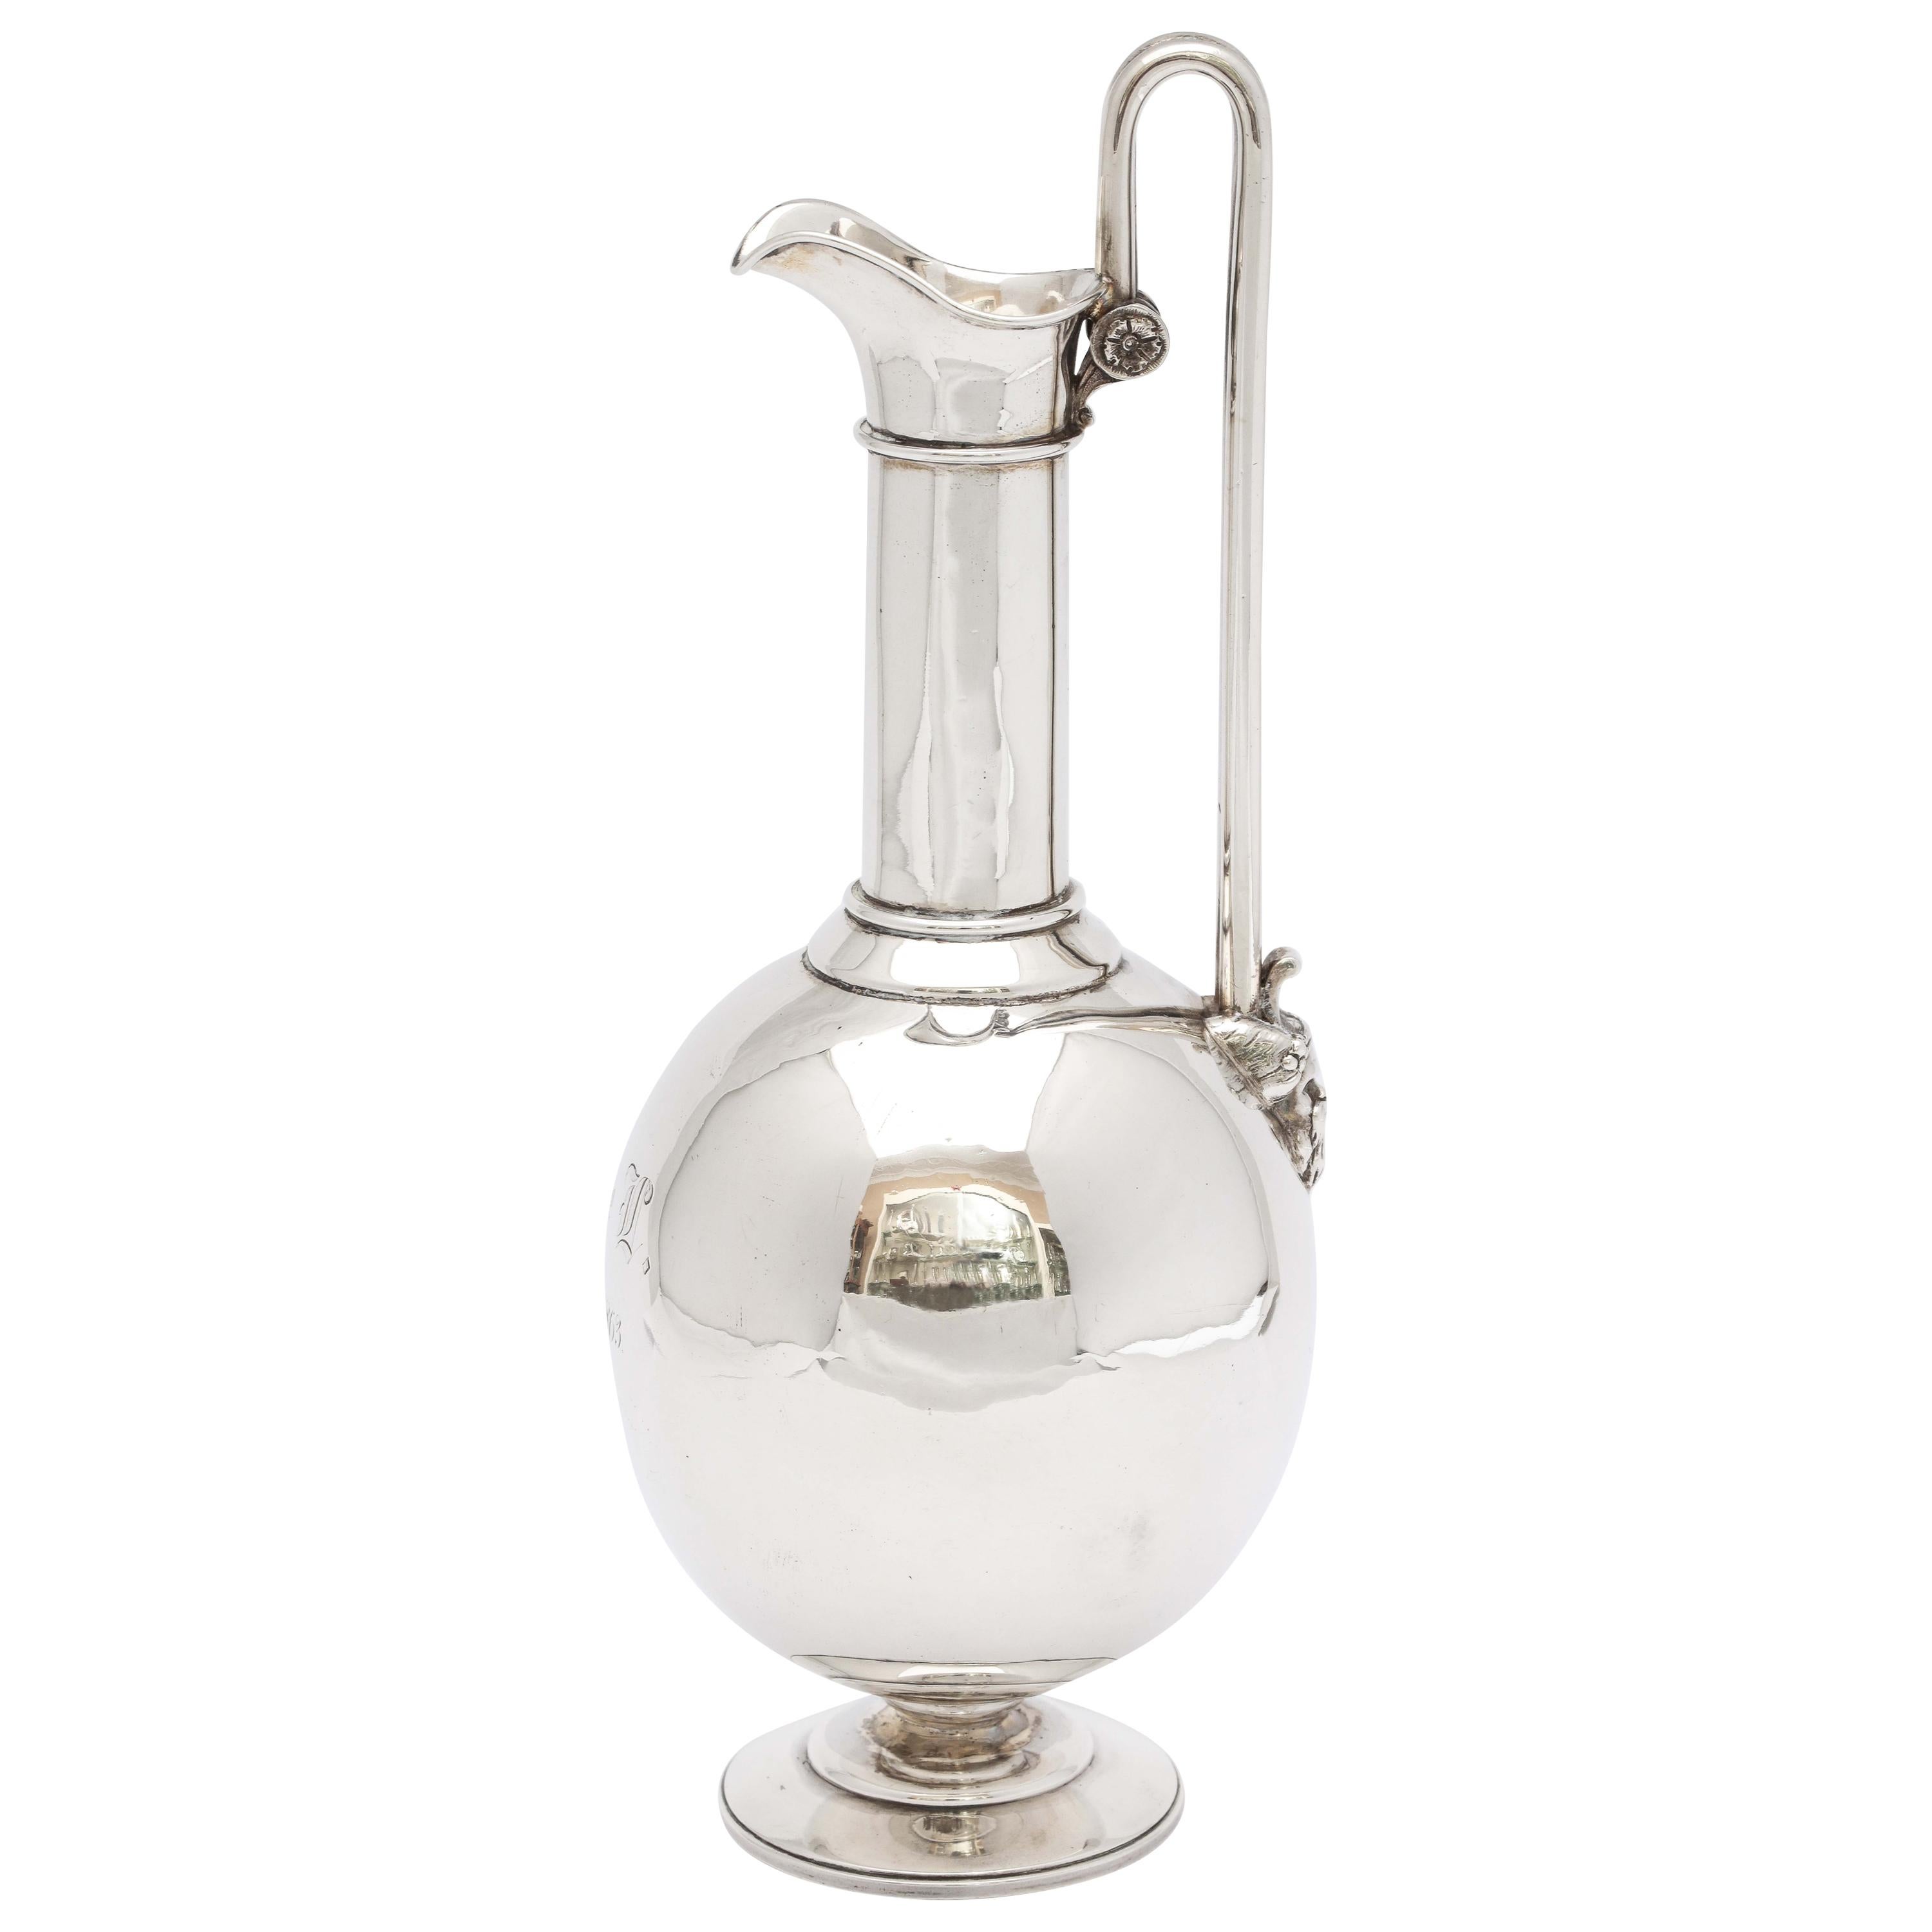 Neoclassical Sterling Silver Ewer/Pitcher by Tiffany